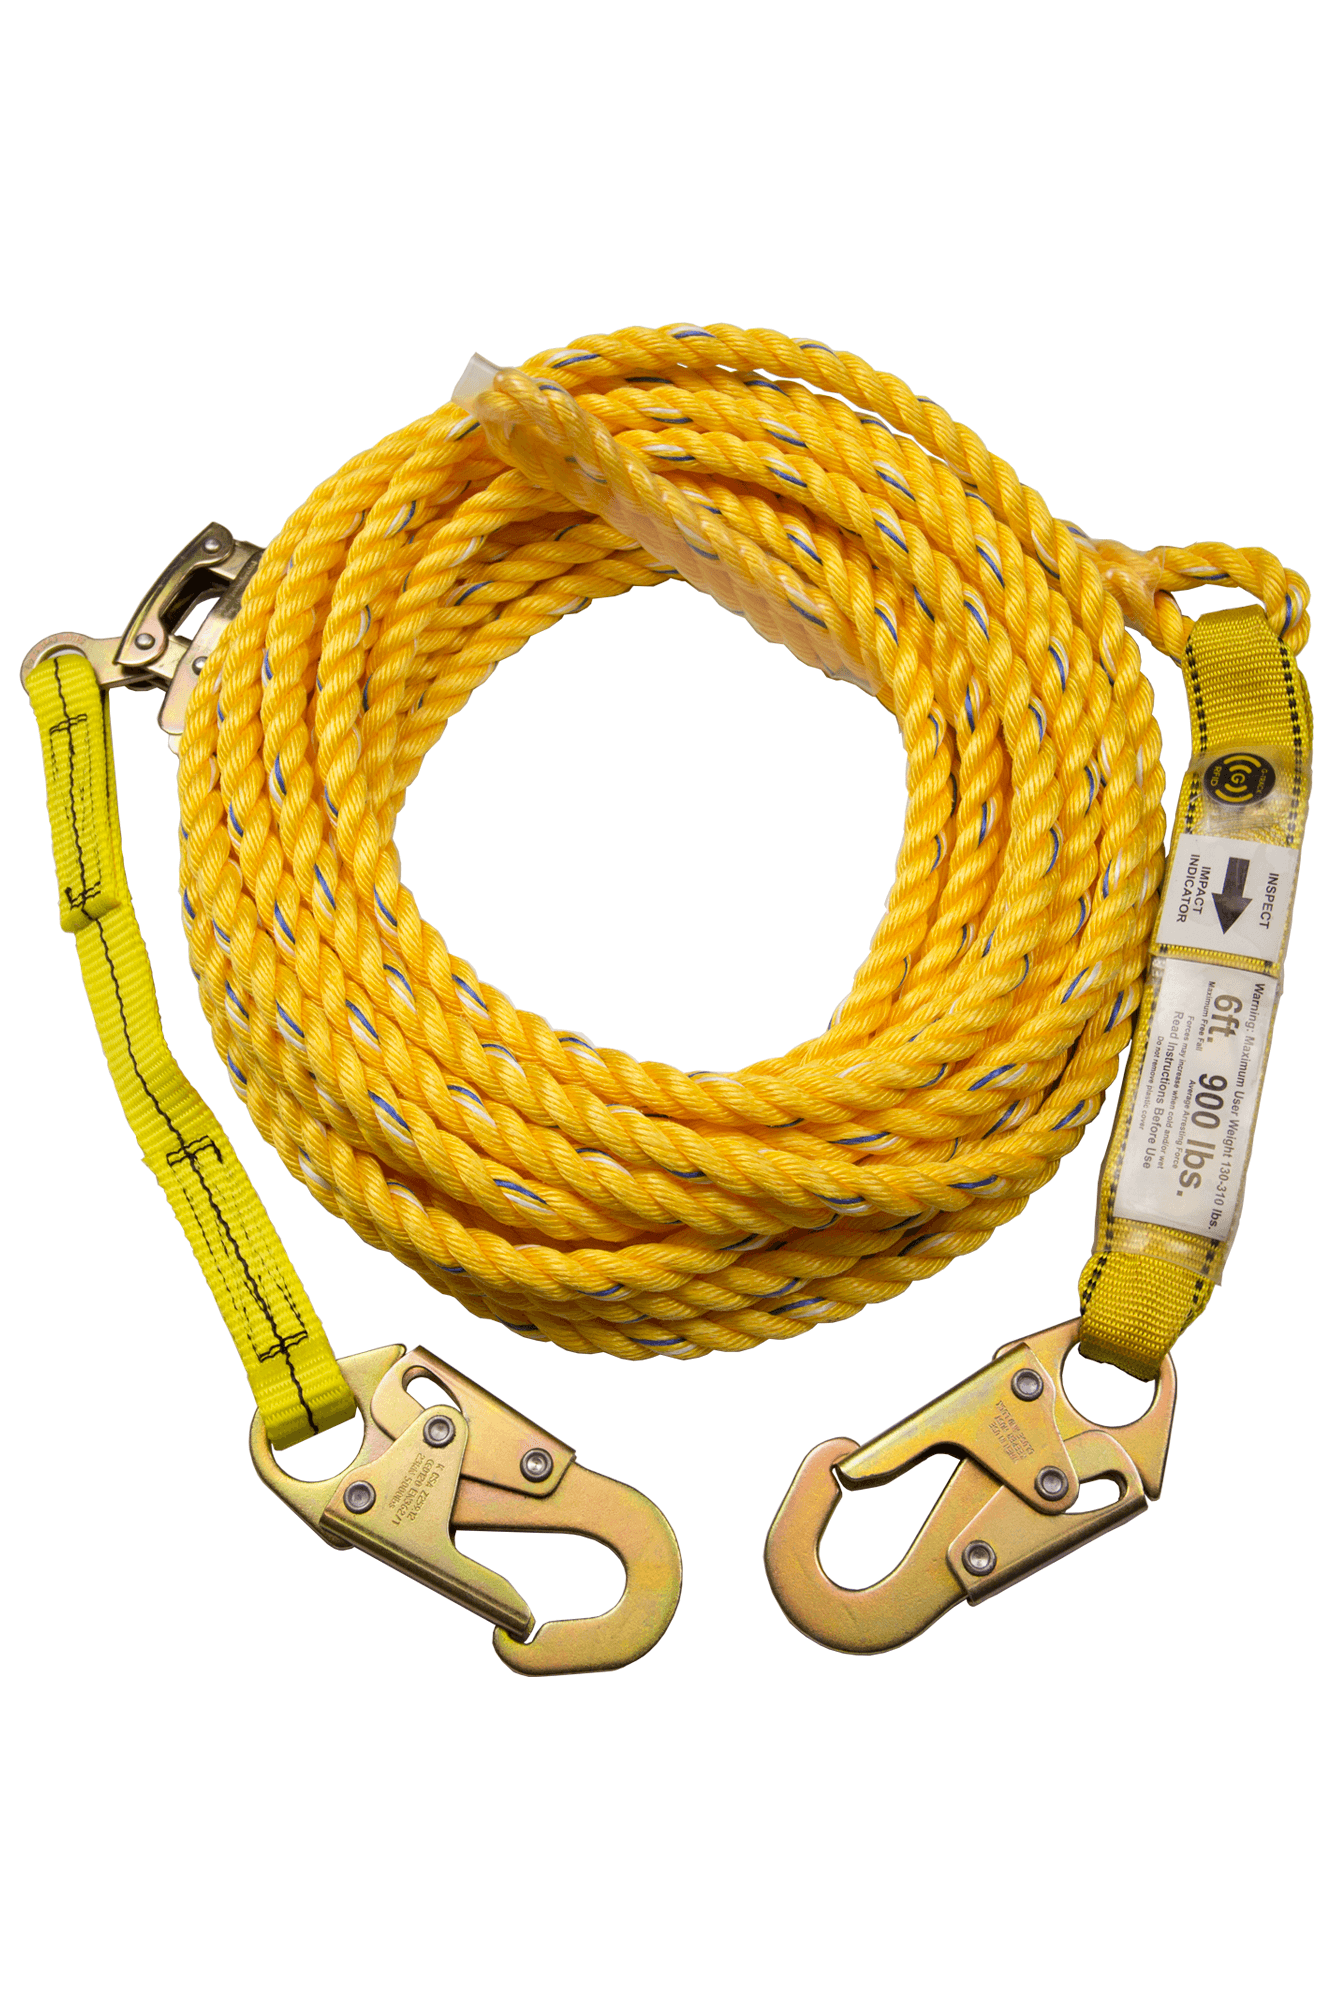 https://www.engineeredfallprotection.com/store/images/thumbs/0001826_guardian-poly-steel-rope-vertical-lifeline-assembly.png